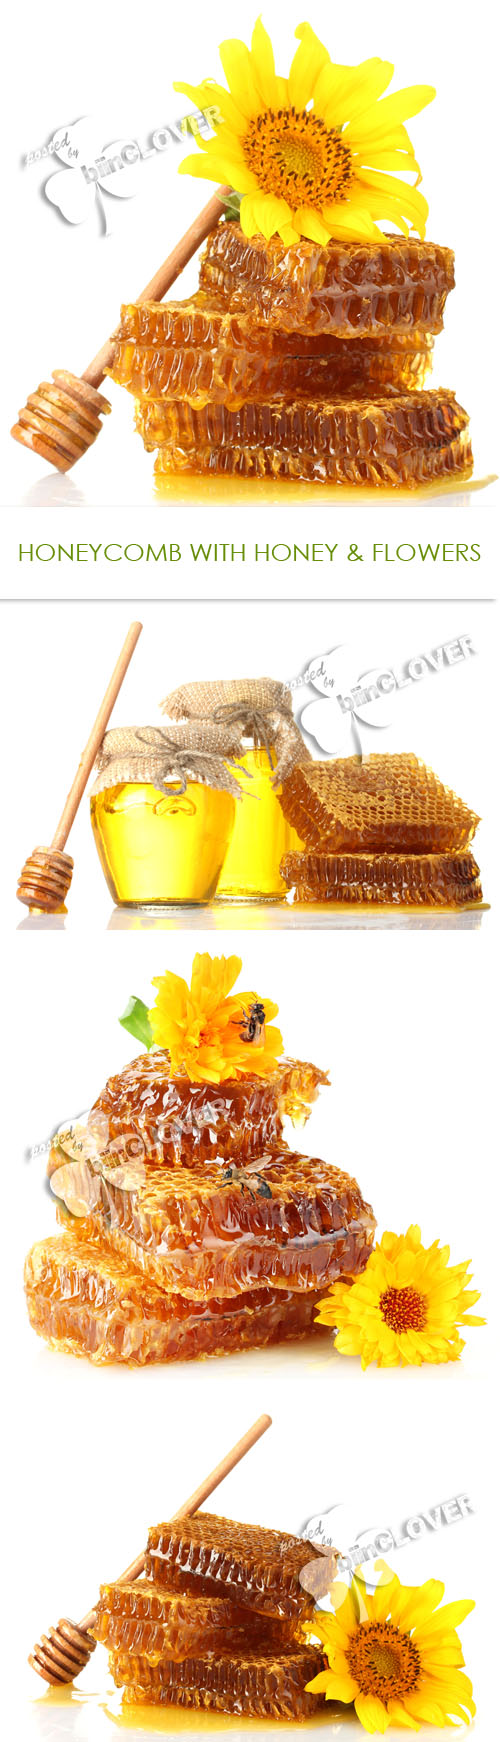 Honeycomb with honey and flowers 0216